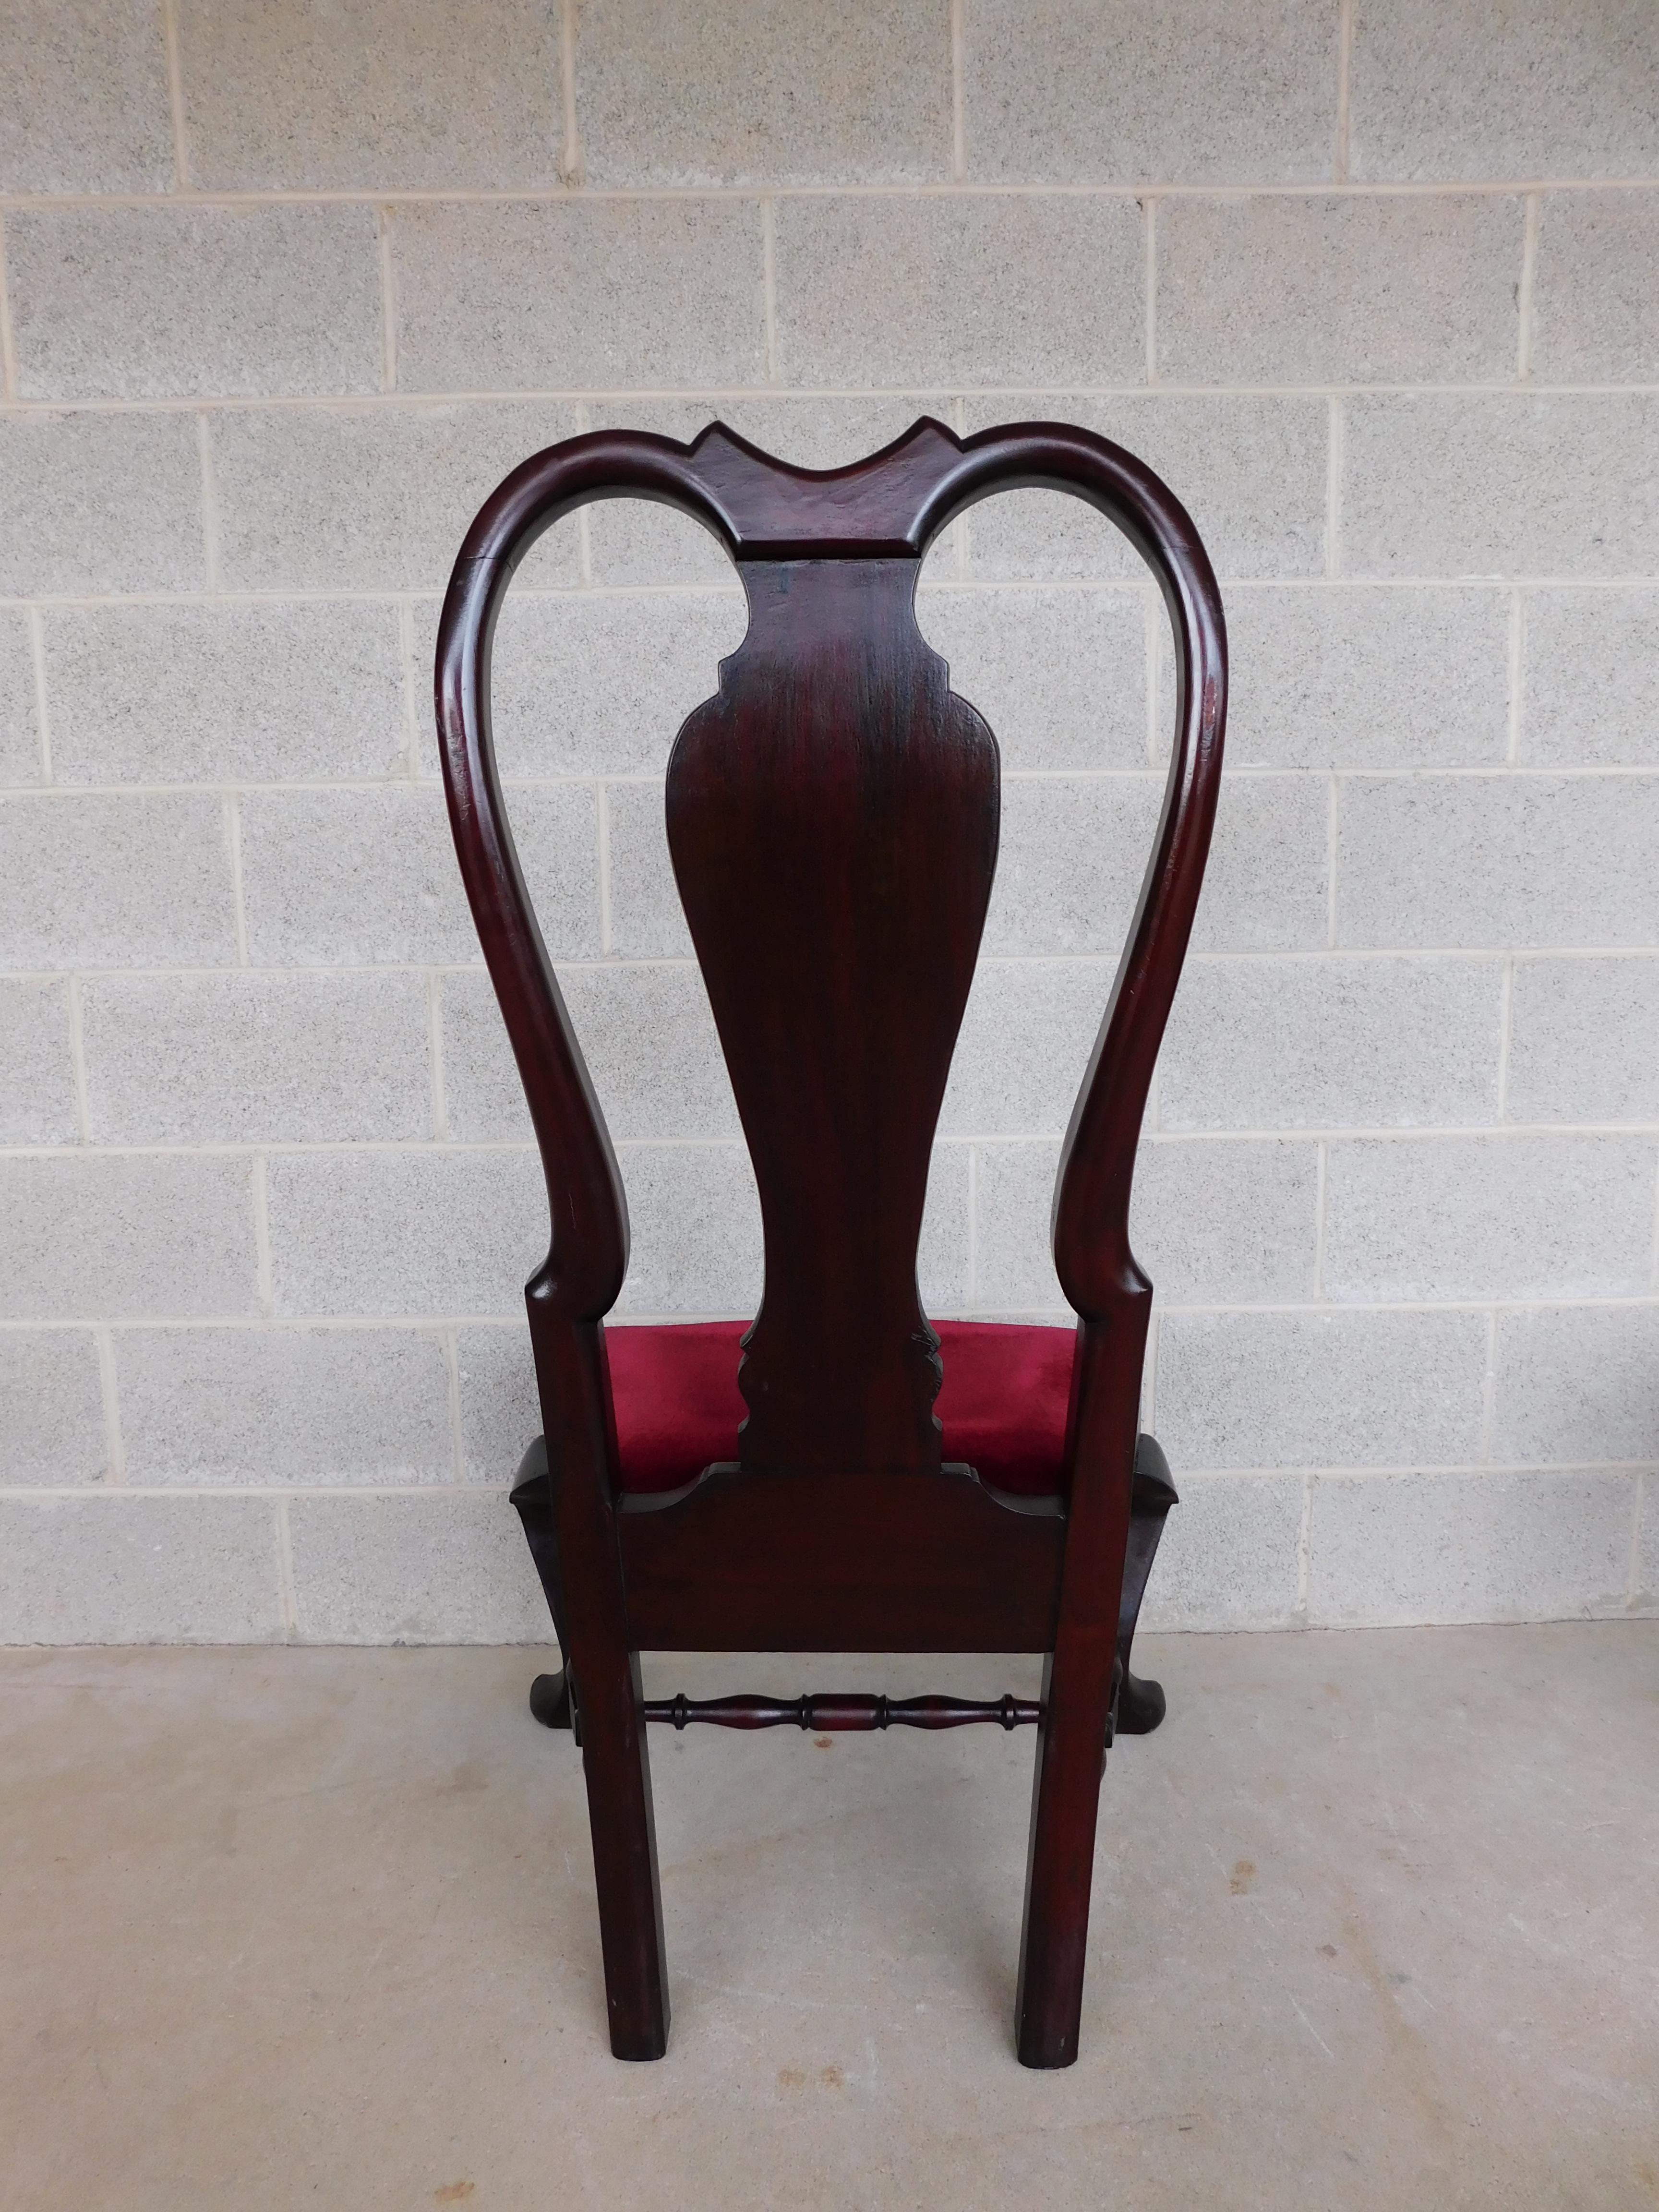 Feldenkreis Mahogany Queen Anne Style Oversize Accent Fireside Chairs - a Pair For Sale 6